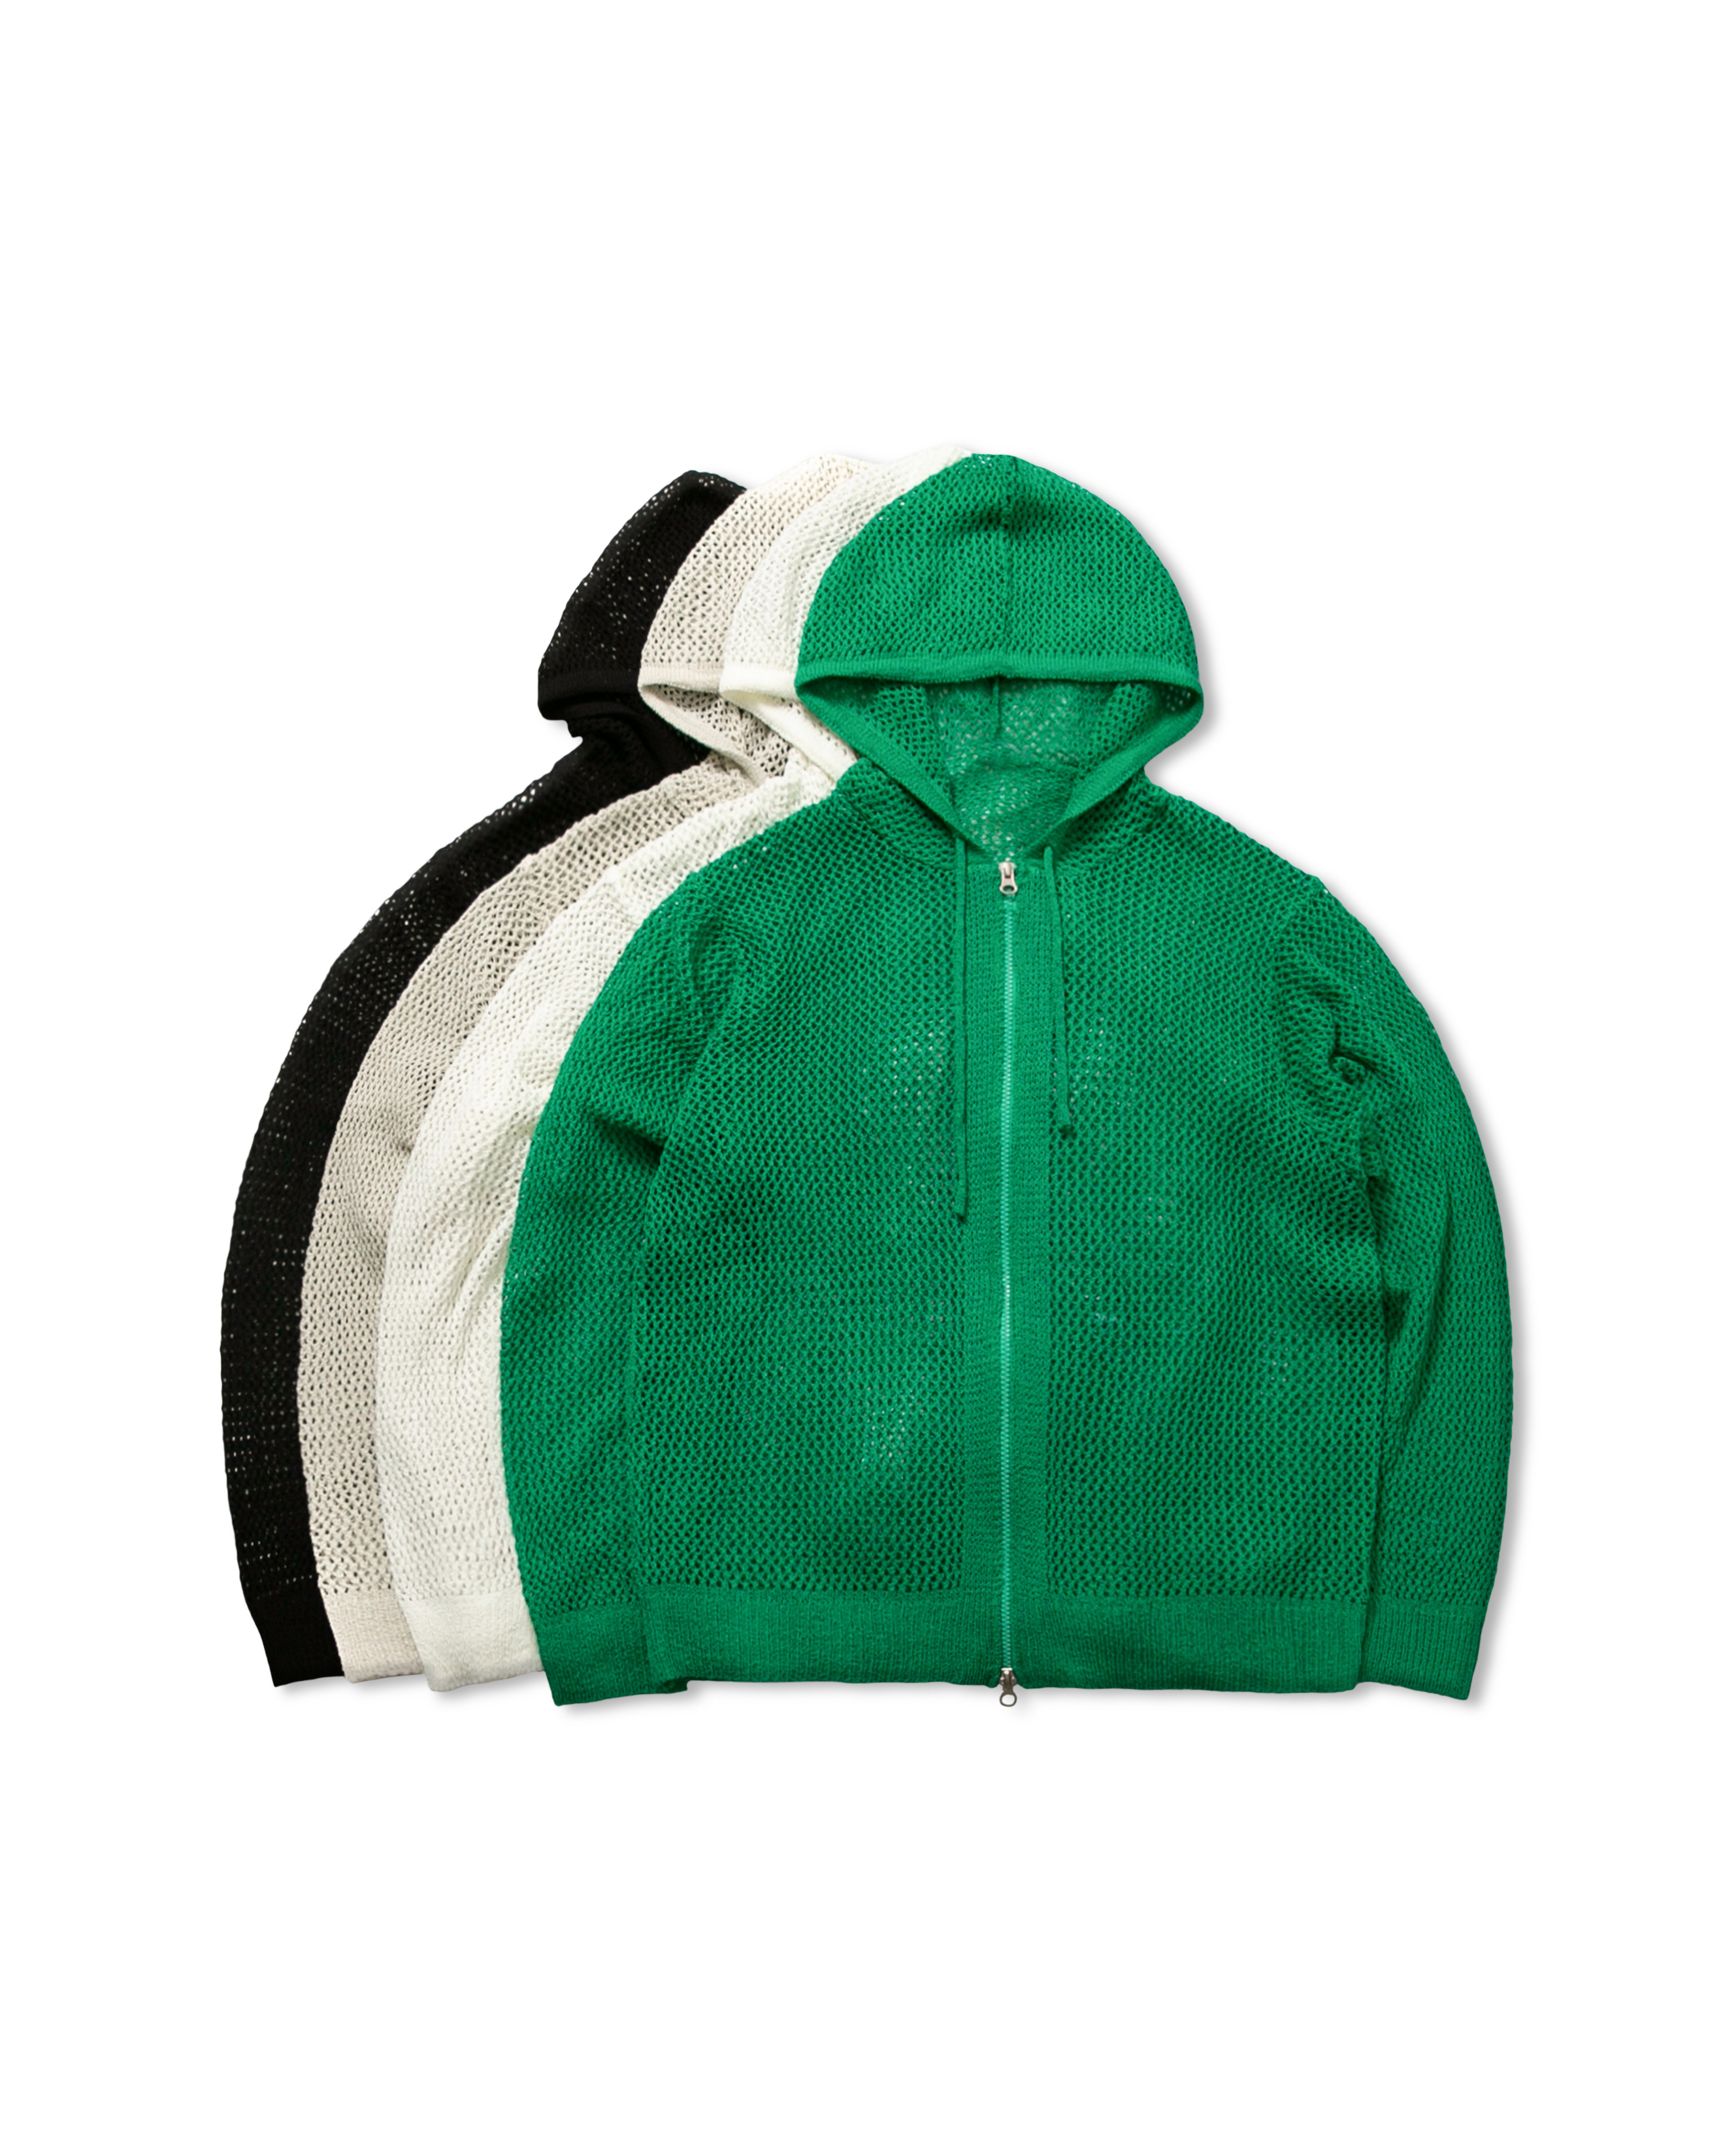 Two Way Mesh Knit Hoodie - 4color